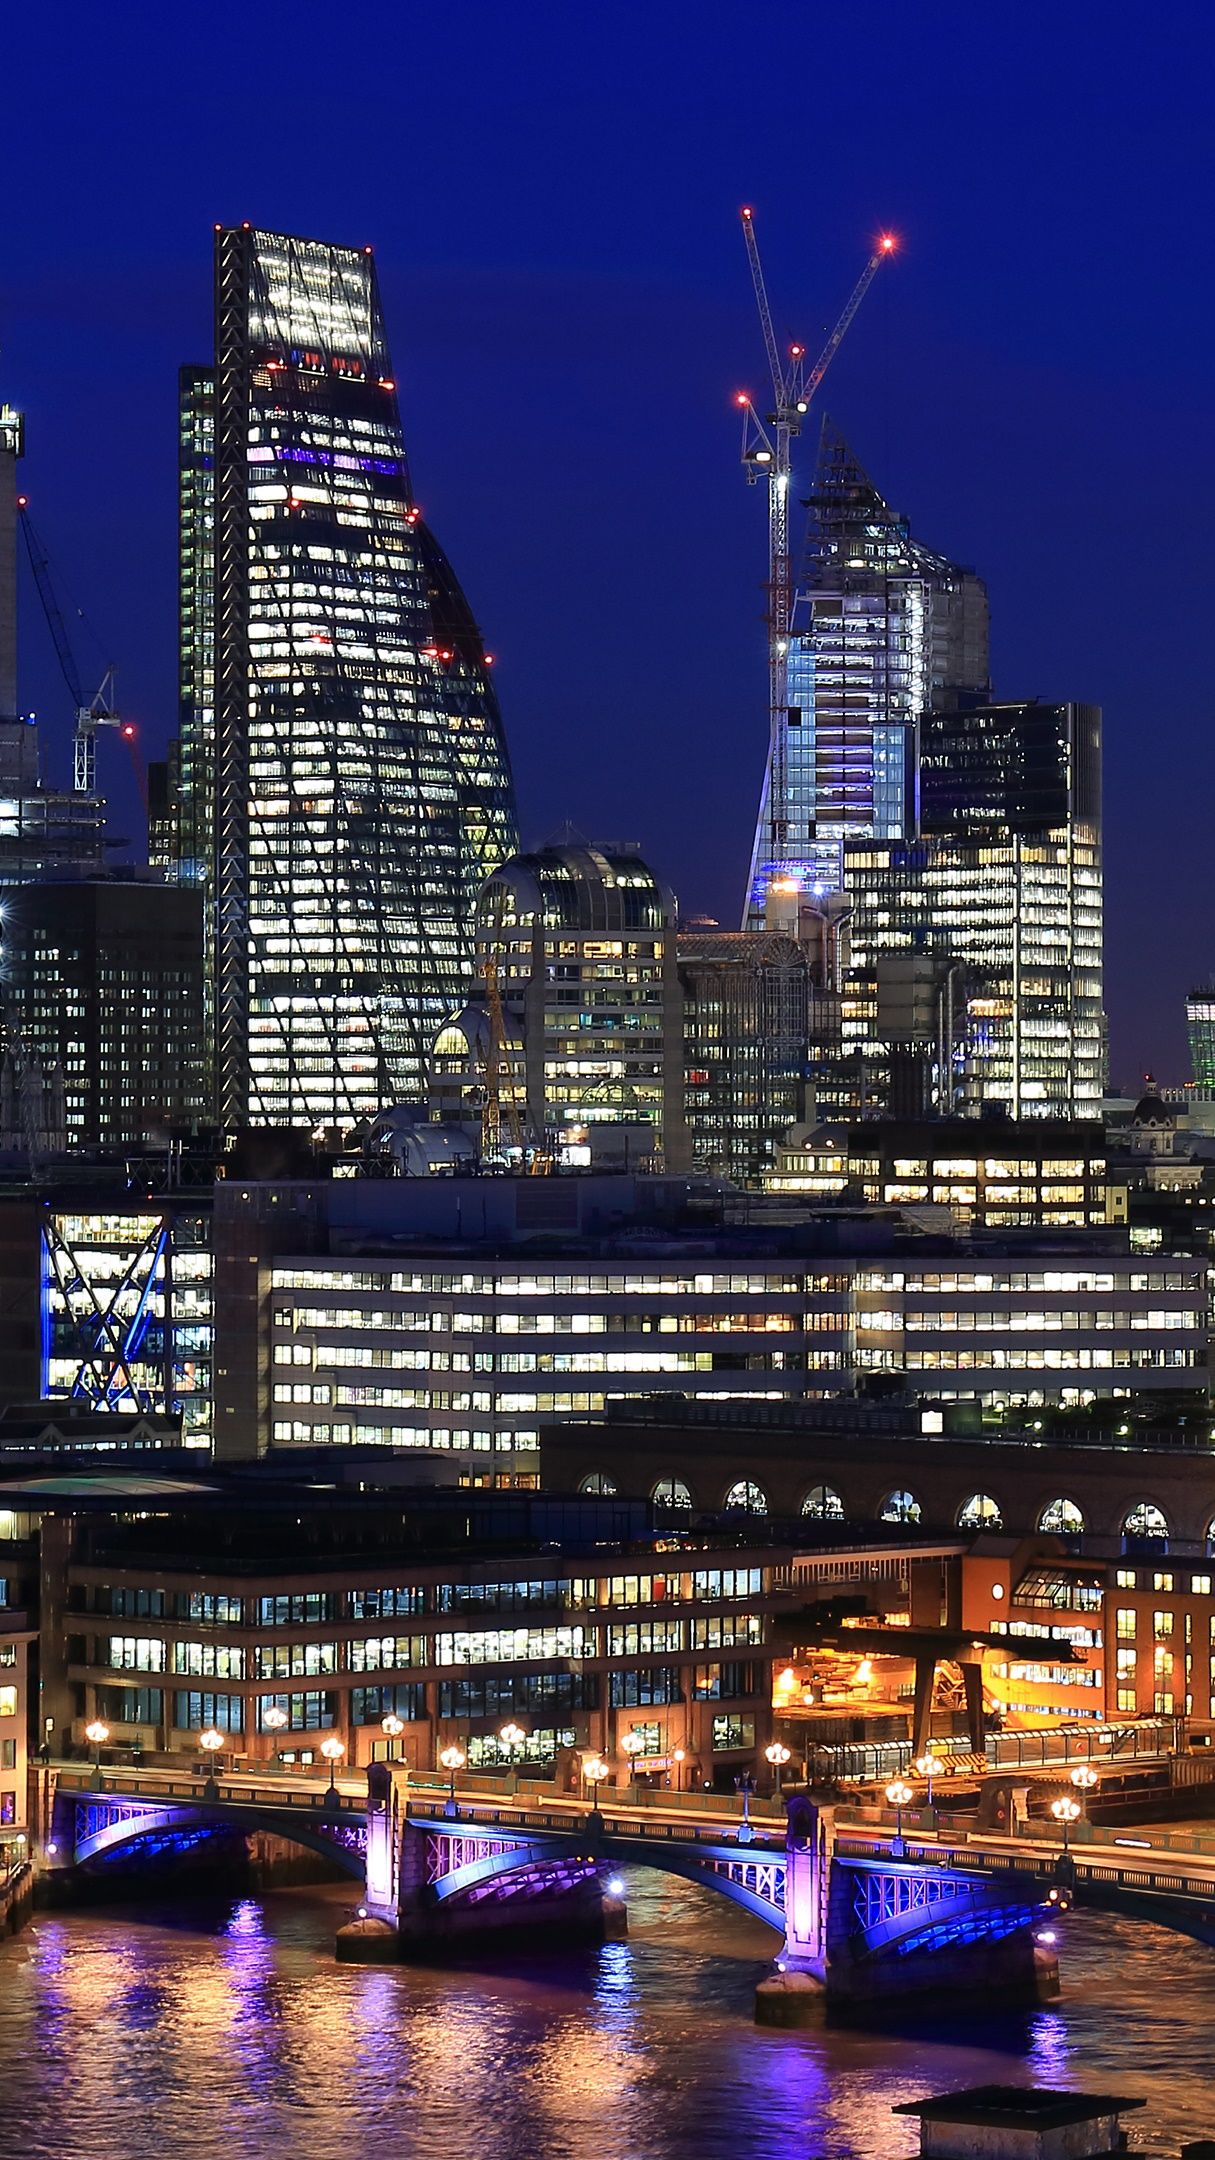 London's financial district at night wallpaper - backiee